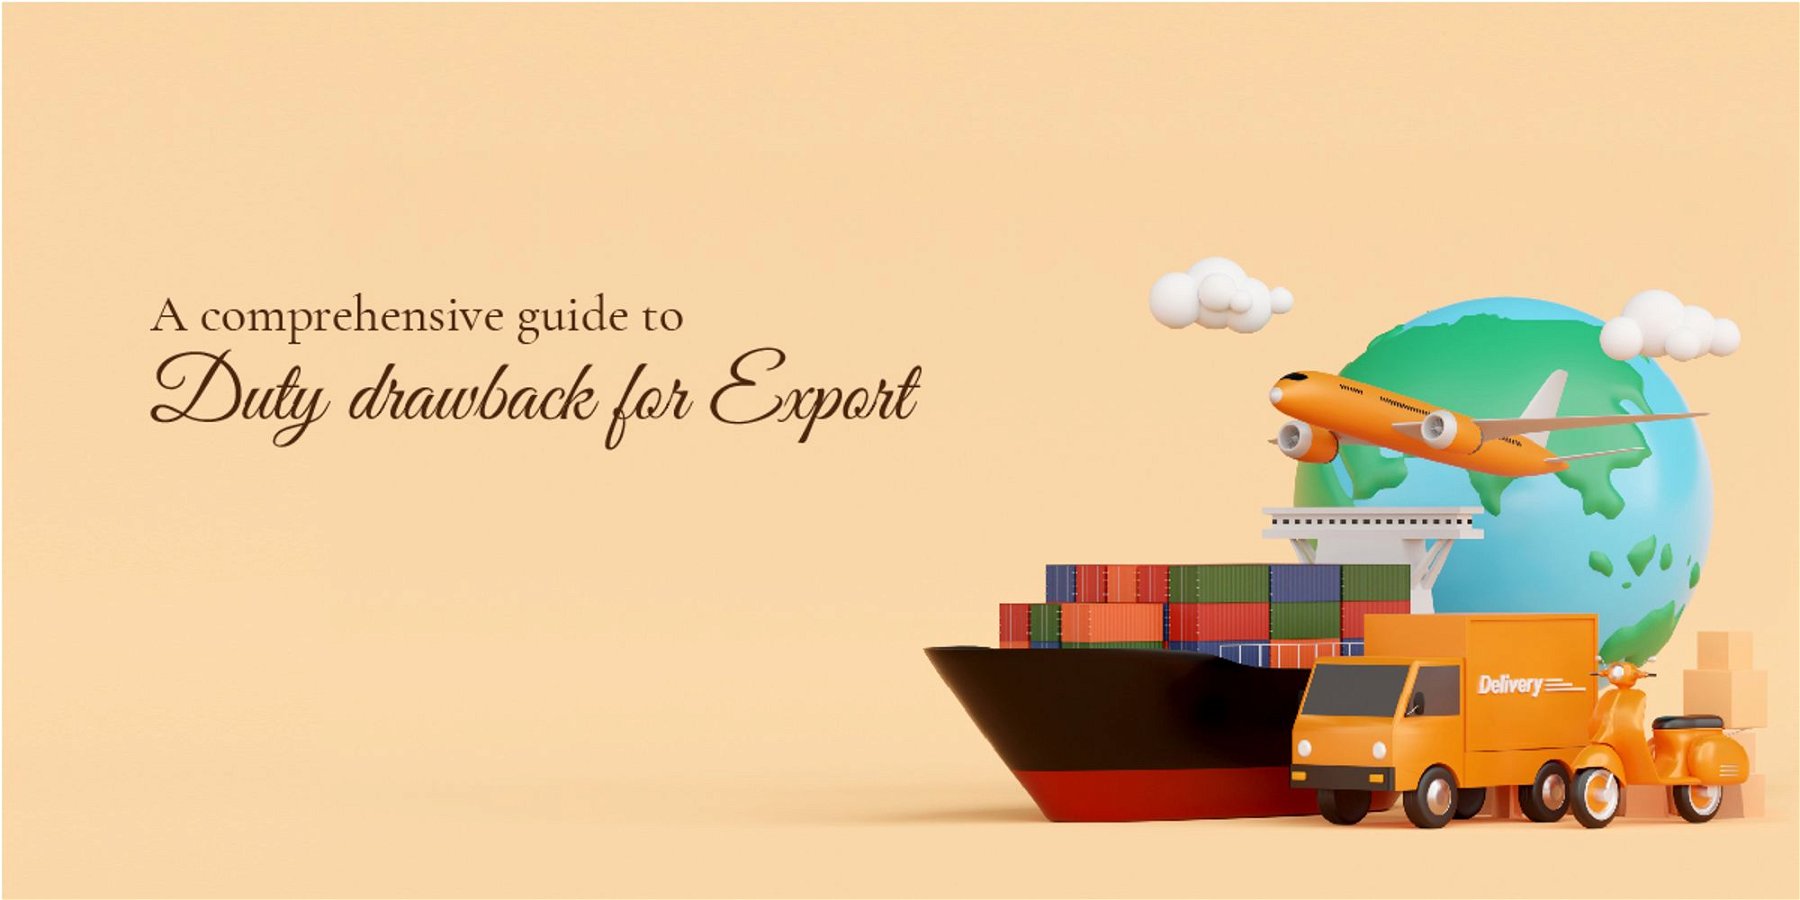 A comprehensive guide to duty drawback for export